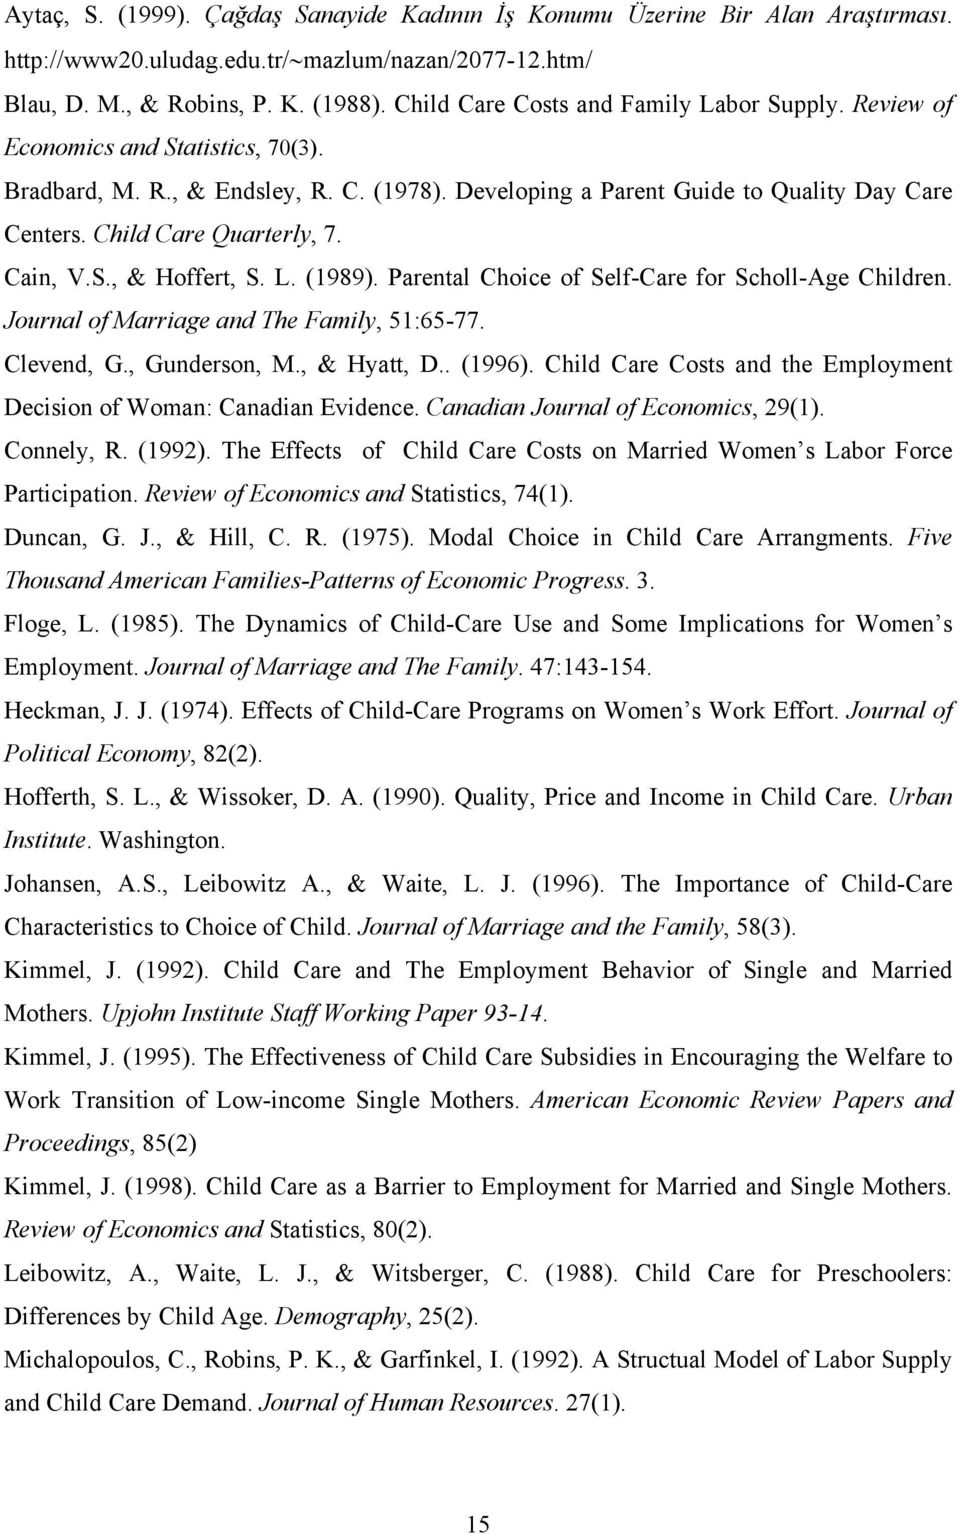 Child Care Quarterly, 7. Cain, V.S., & Hoffert, S. L. (1989). Parental Choice of Self-Care for Scholl-Age Children. Journal of Marriage and The Family, 51:65-77. Clevend, G., Gunderson, M.